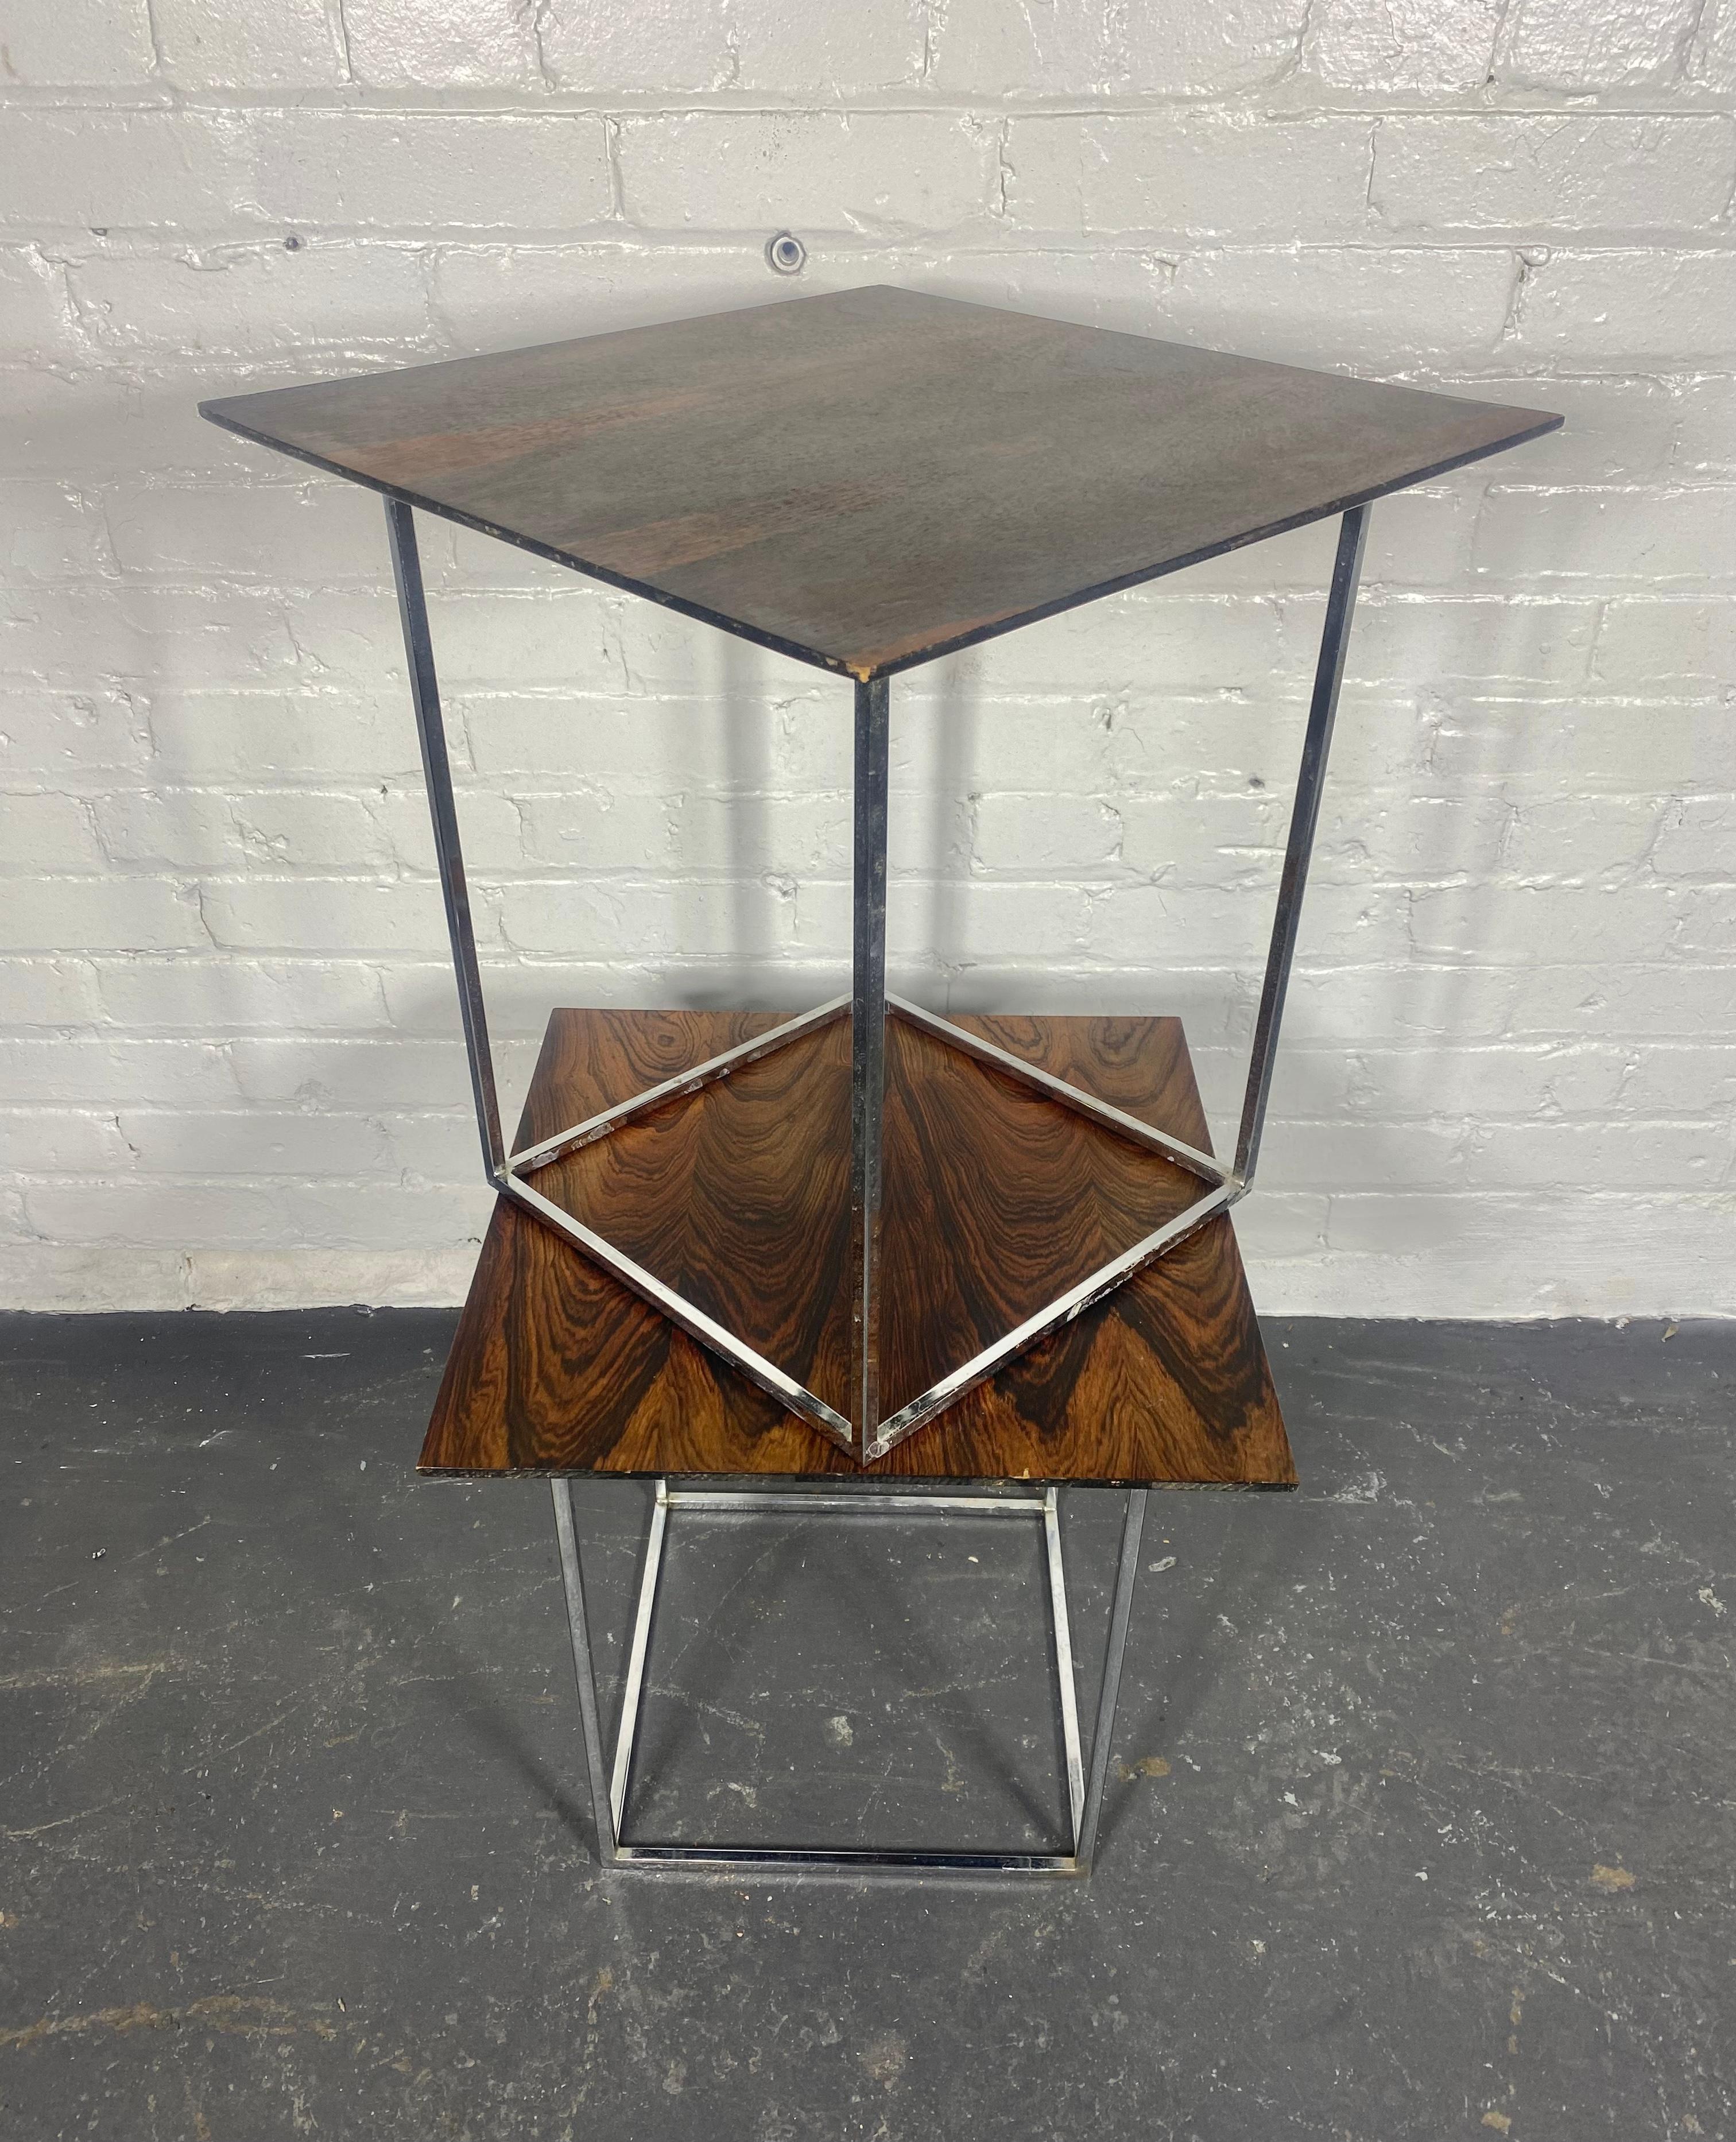 Matched Pair Rosewood and Chrome Tables or stands attributed to Milo Baughman  for Thayer Coggen  ,Classic 60s'70s Modernist design,, Handsome rosewood veneer,, richly grained,Art / sculpture.. MINOR BUMPS AND BRUISES, edge wear,, 